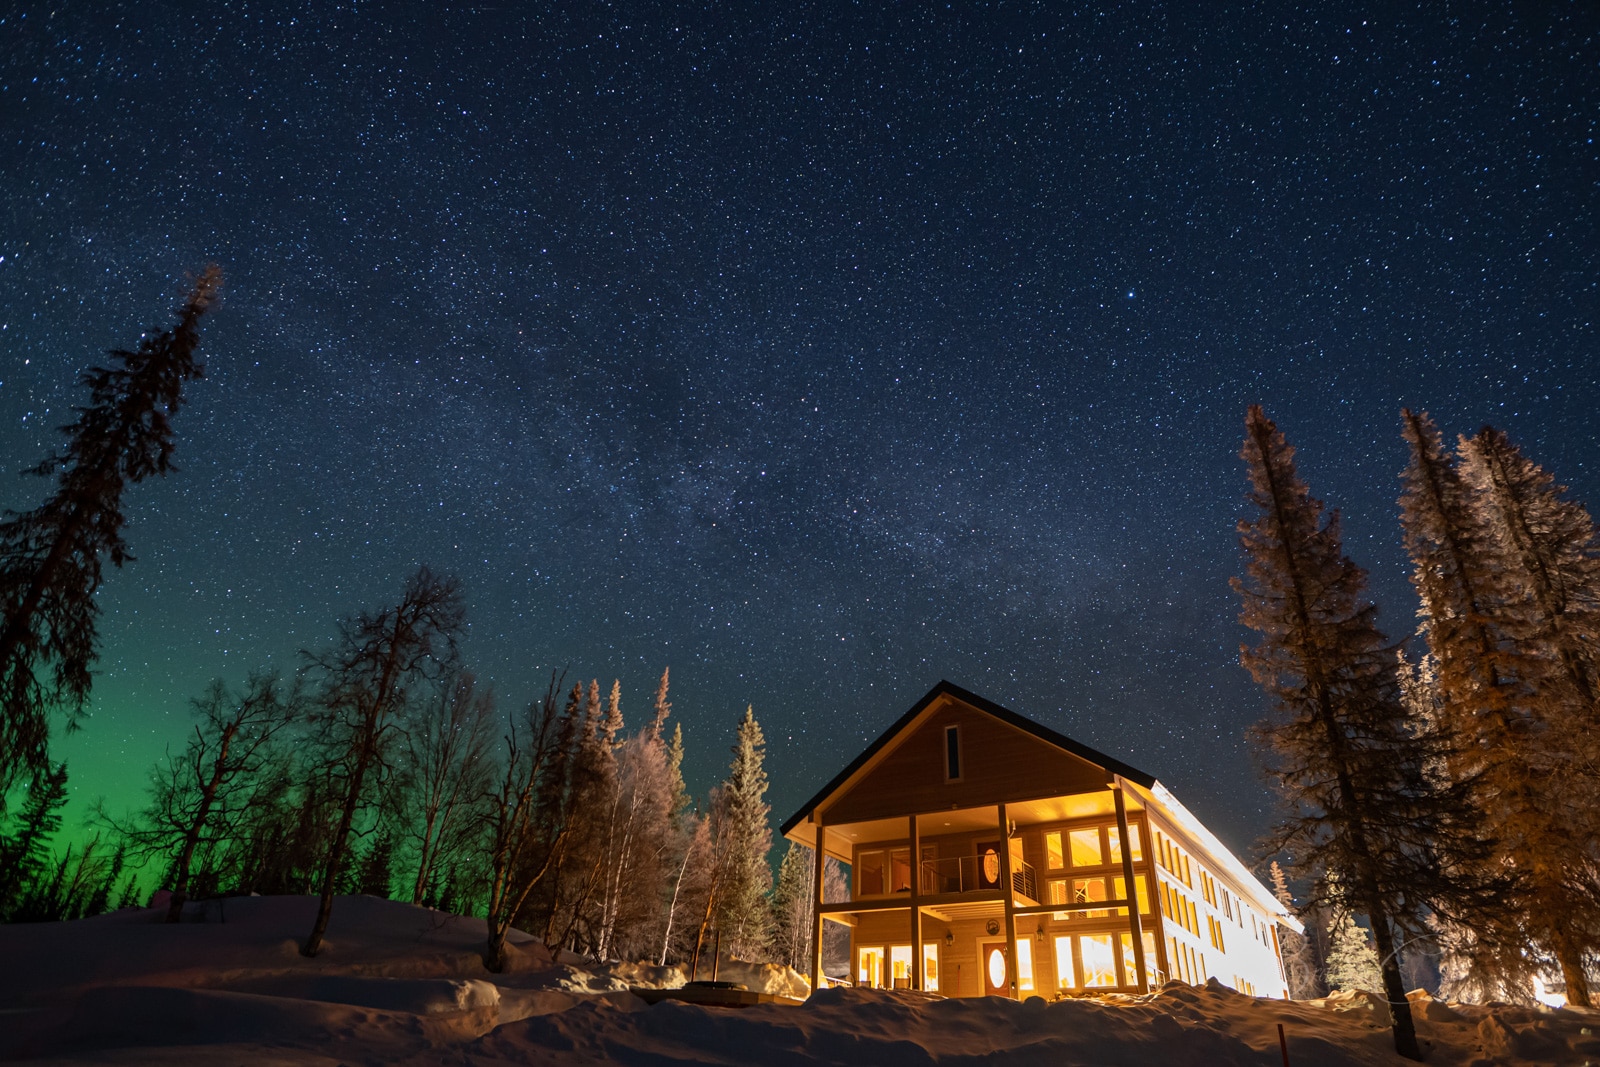 Judd lake lodge under the stars on a clear night